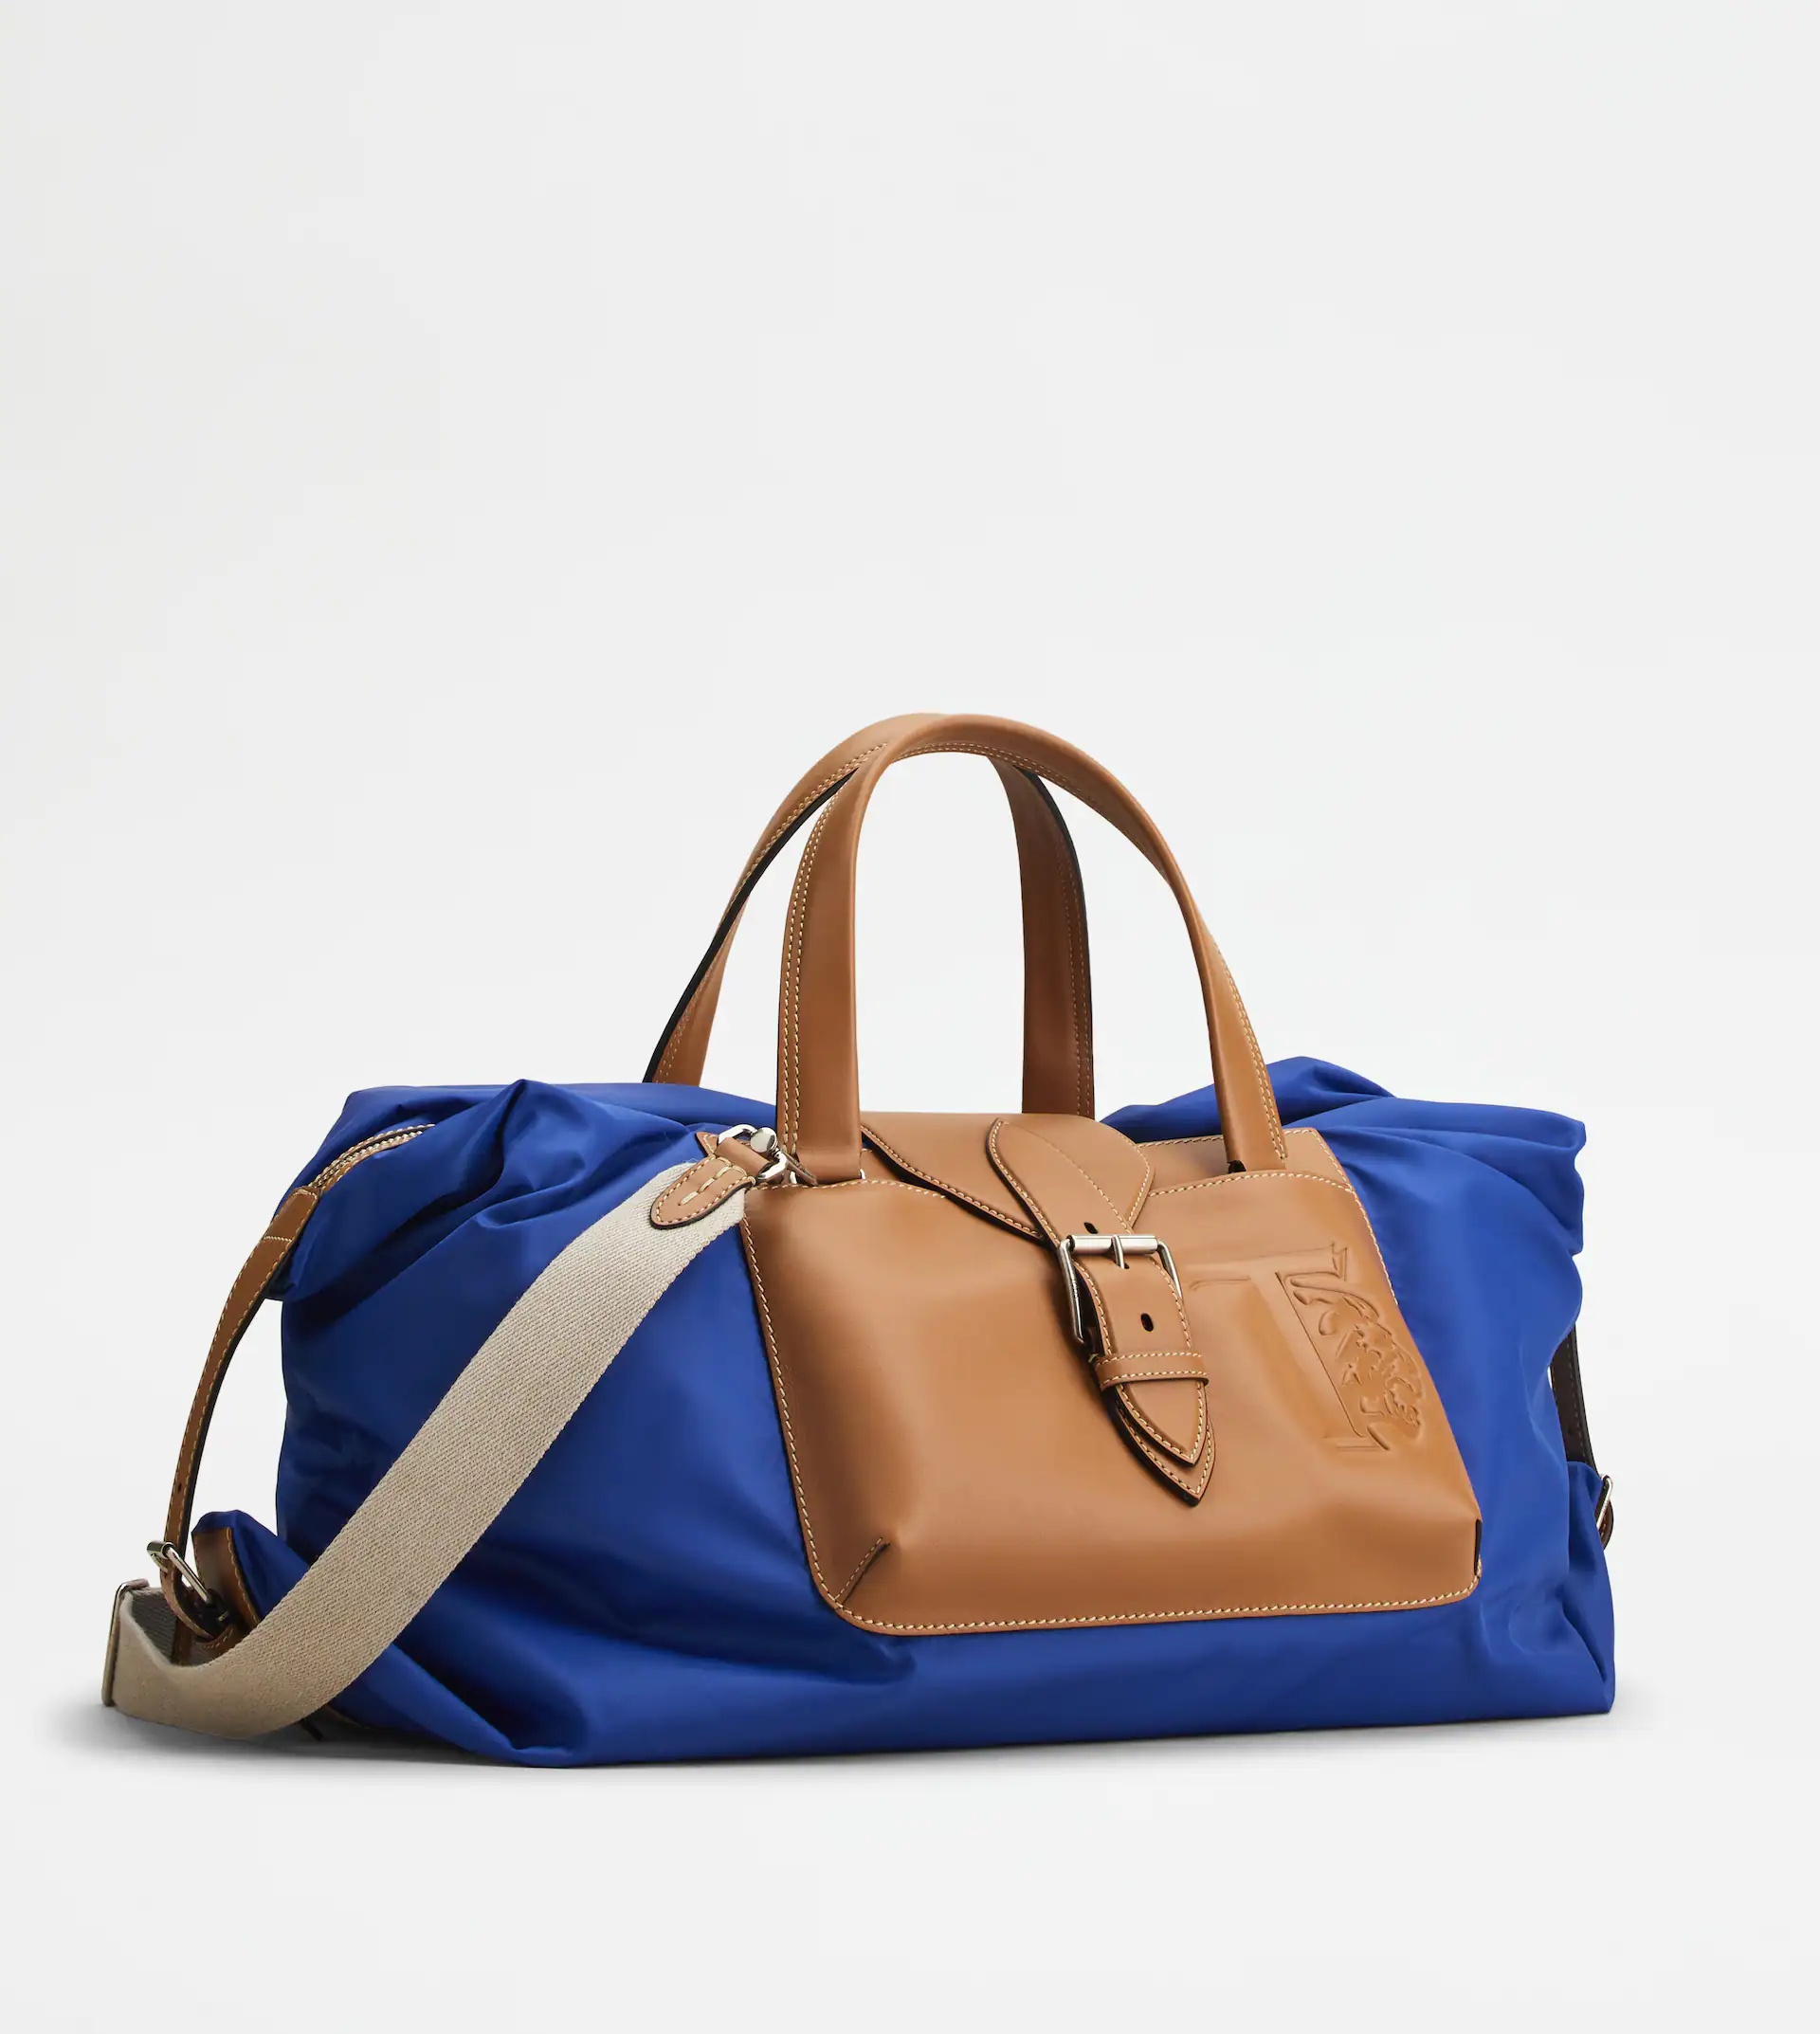 DUFFLE BAG IN FABRIC AND LEATHER MEDIUM - BLUE, BROWN - 4